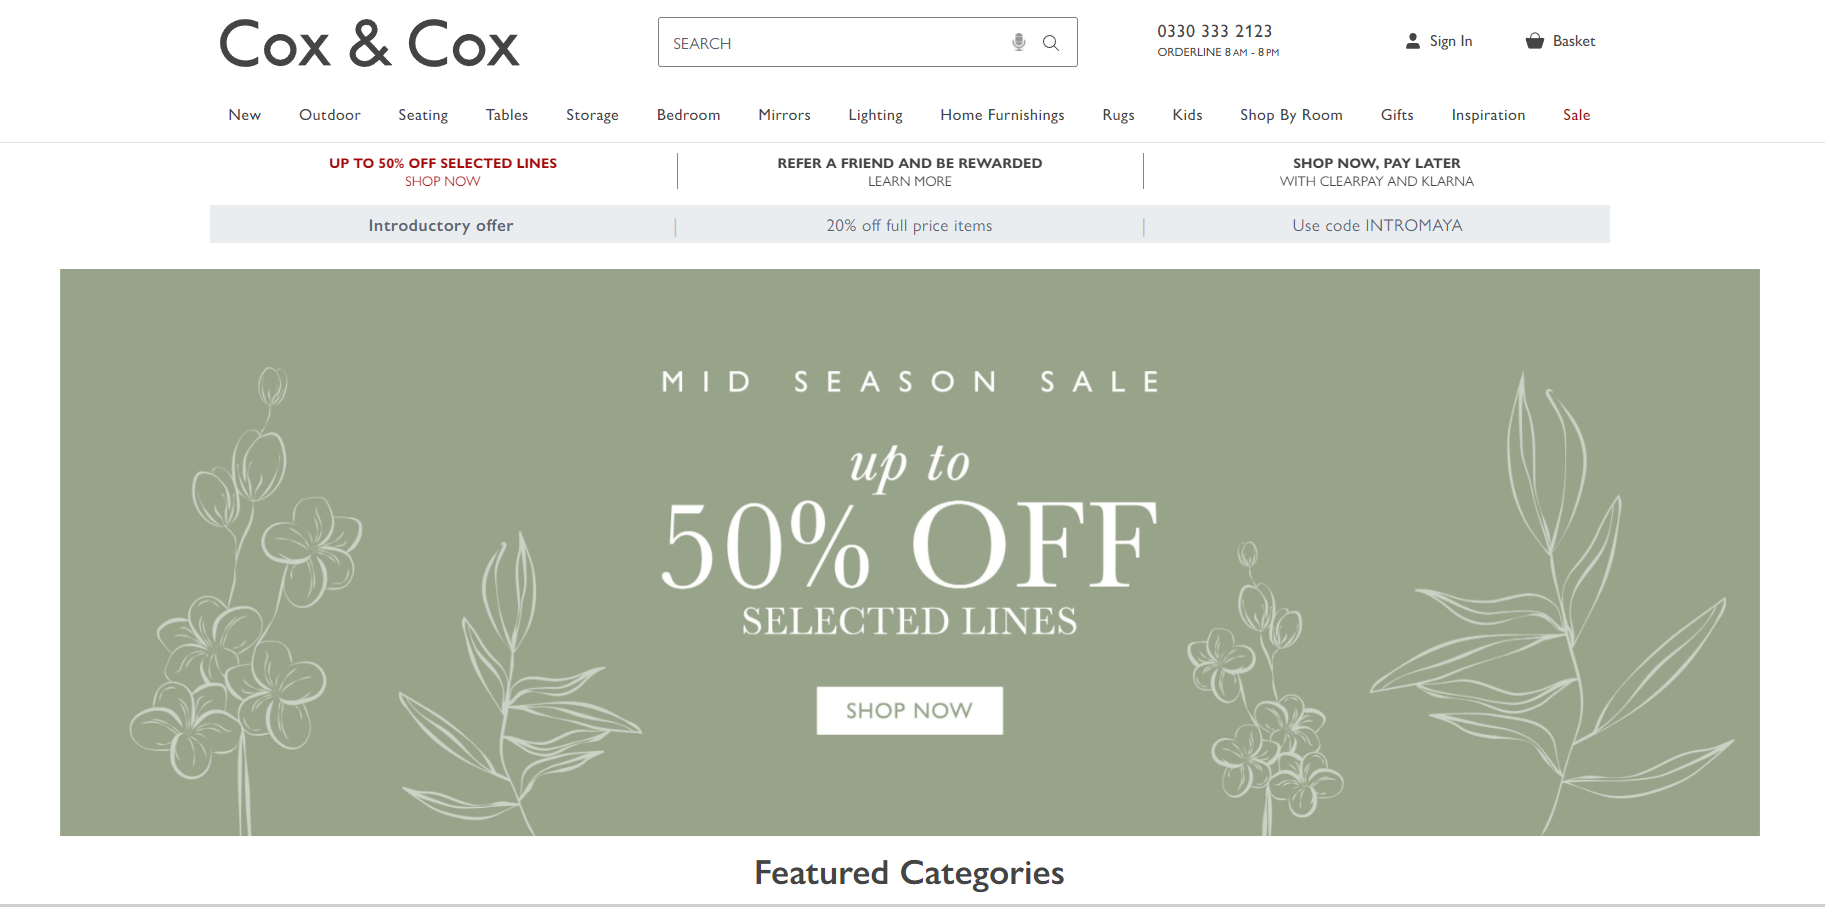 Cox & Cox is one of the best websites that makes use of Magento 2